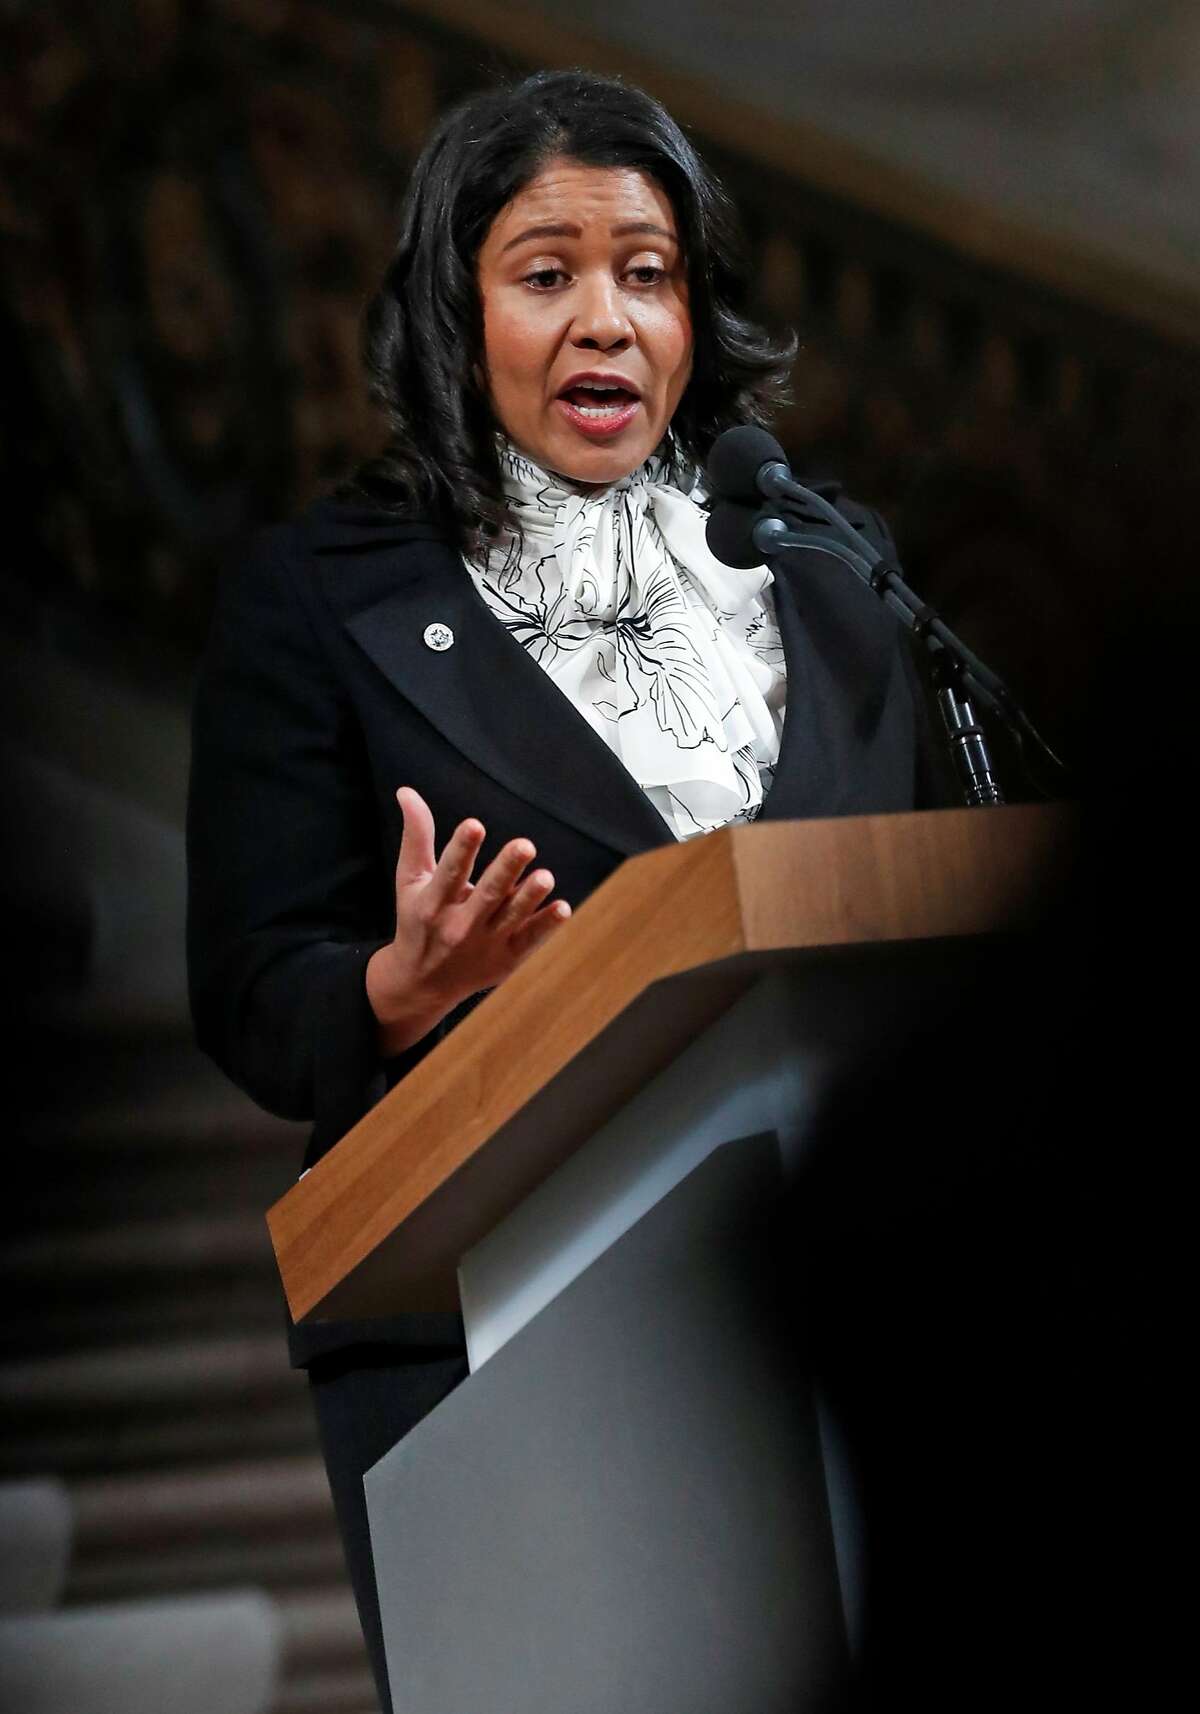 San Francisco Acting Mayor London Breed speaks during a service Celebrating the Life of Mayor Edwin M. Lee at San Francisco City Hall in San Francisco, Calif., on Sunday, December 17, 2017.